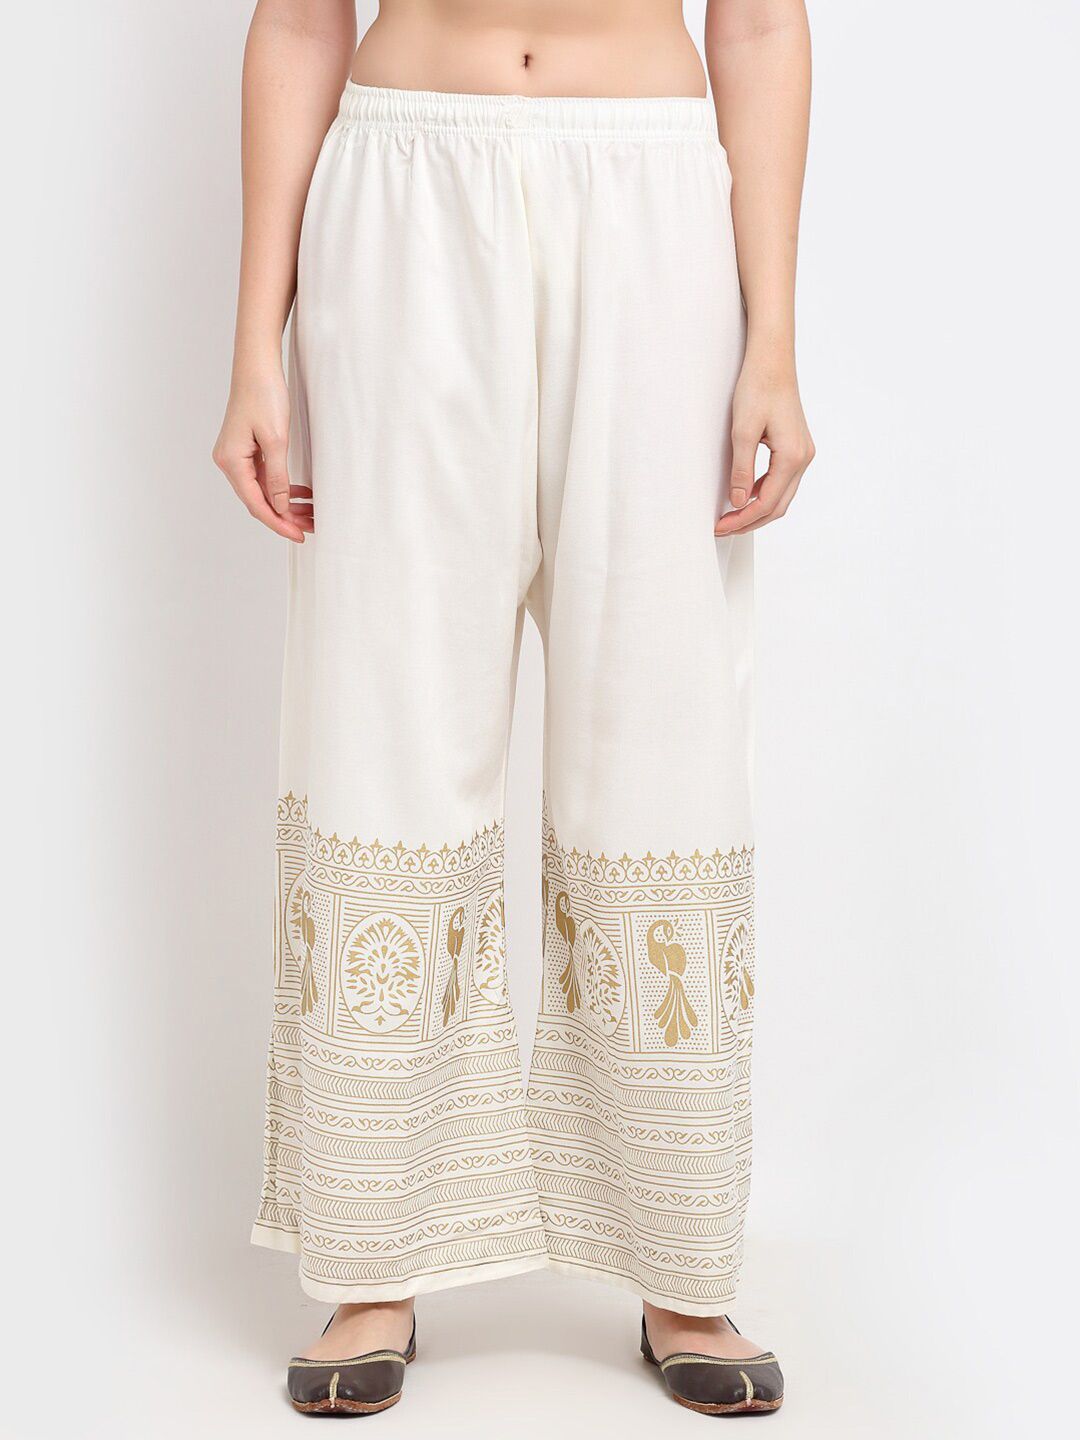 TAG 7 Women White & Gold-Toned Ethnic Motifs Printed Flared Ethnic Palazzos Price in India